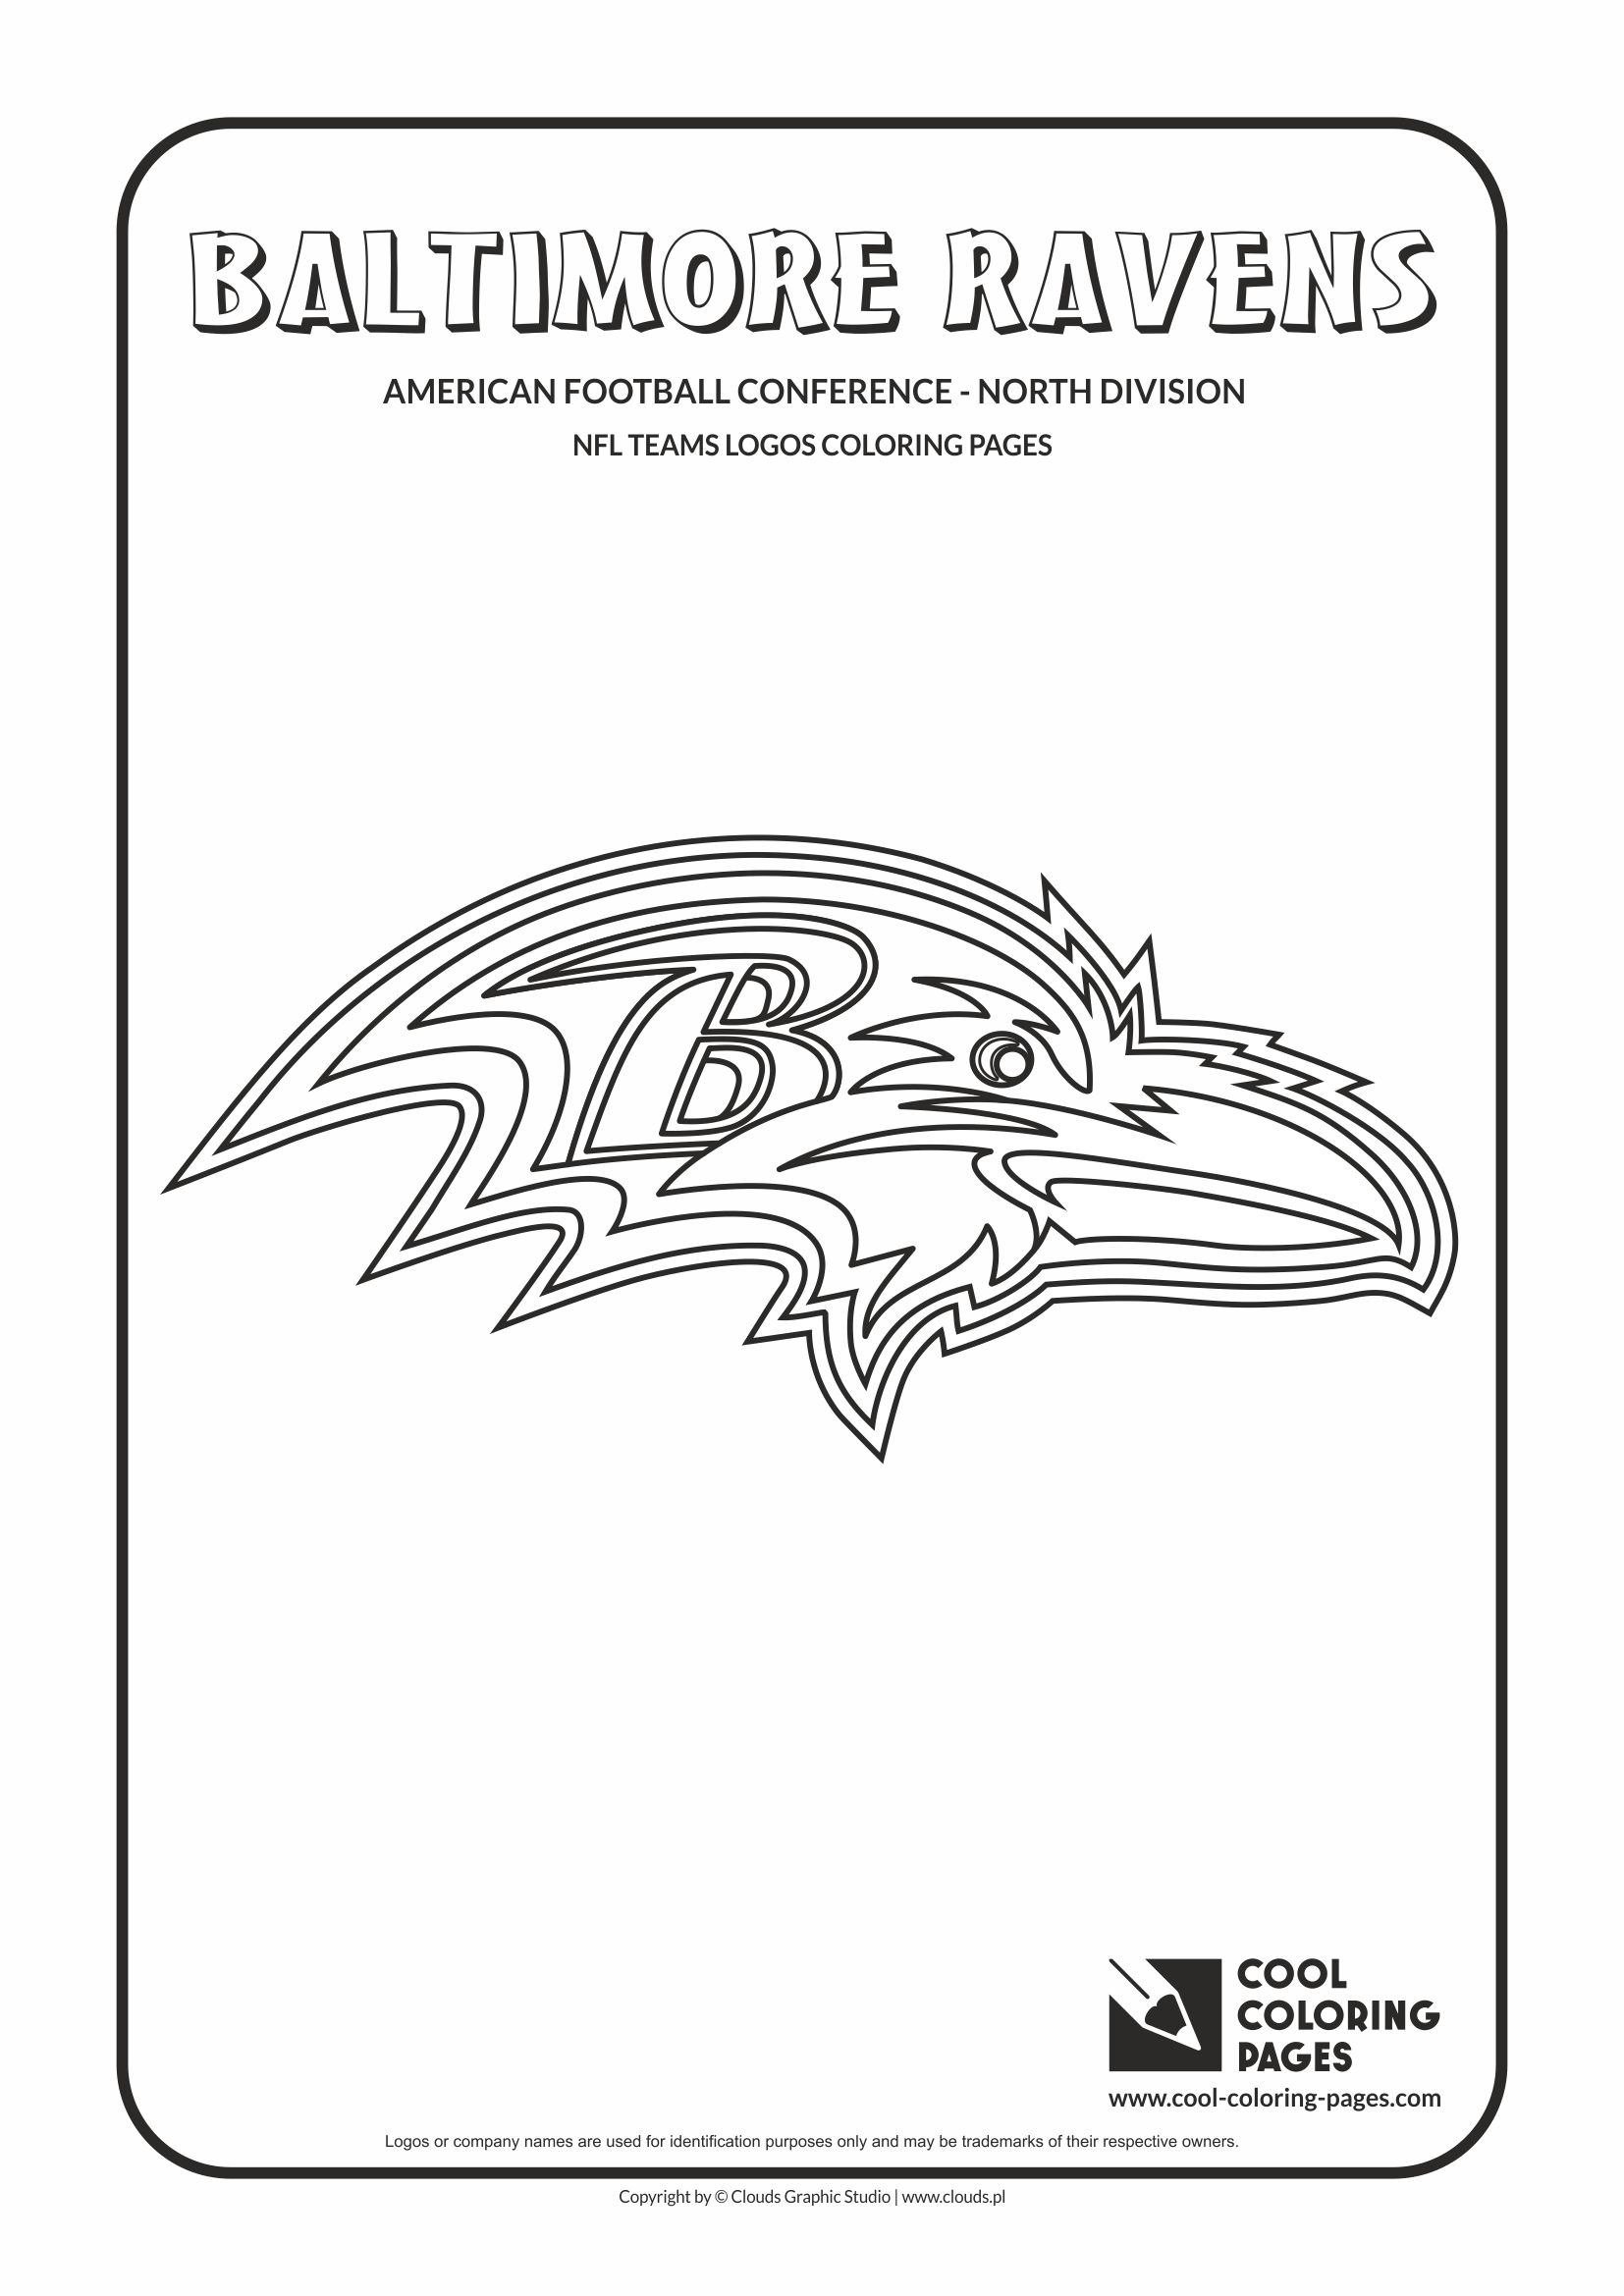 Cool Coloring Pages NFL teams logos coloring pages - Cool 